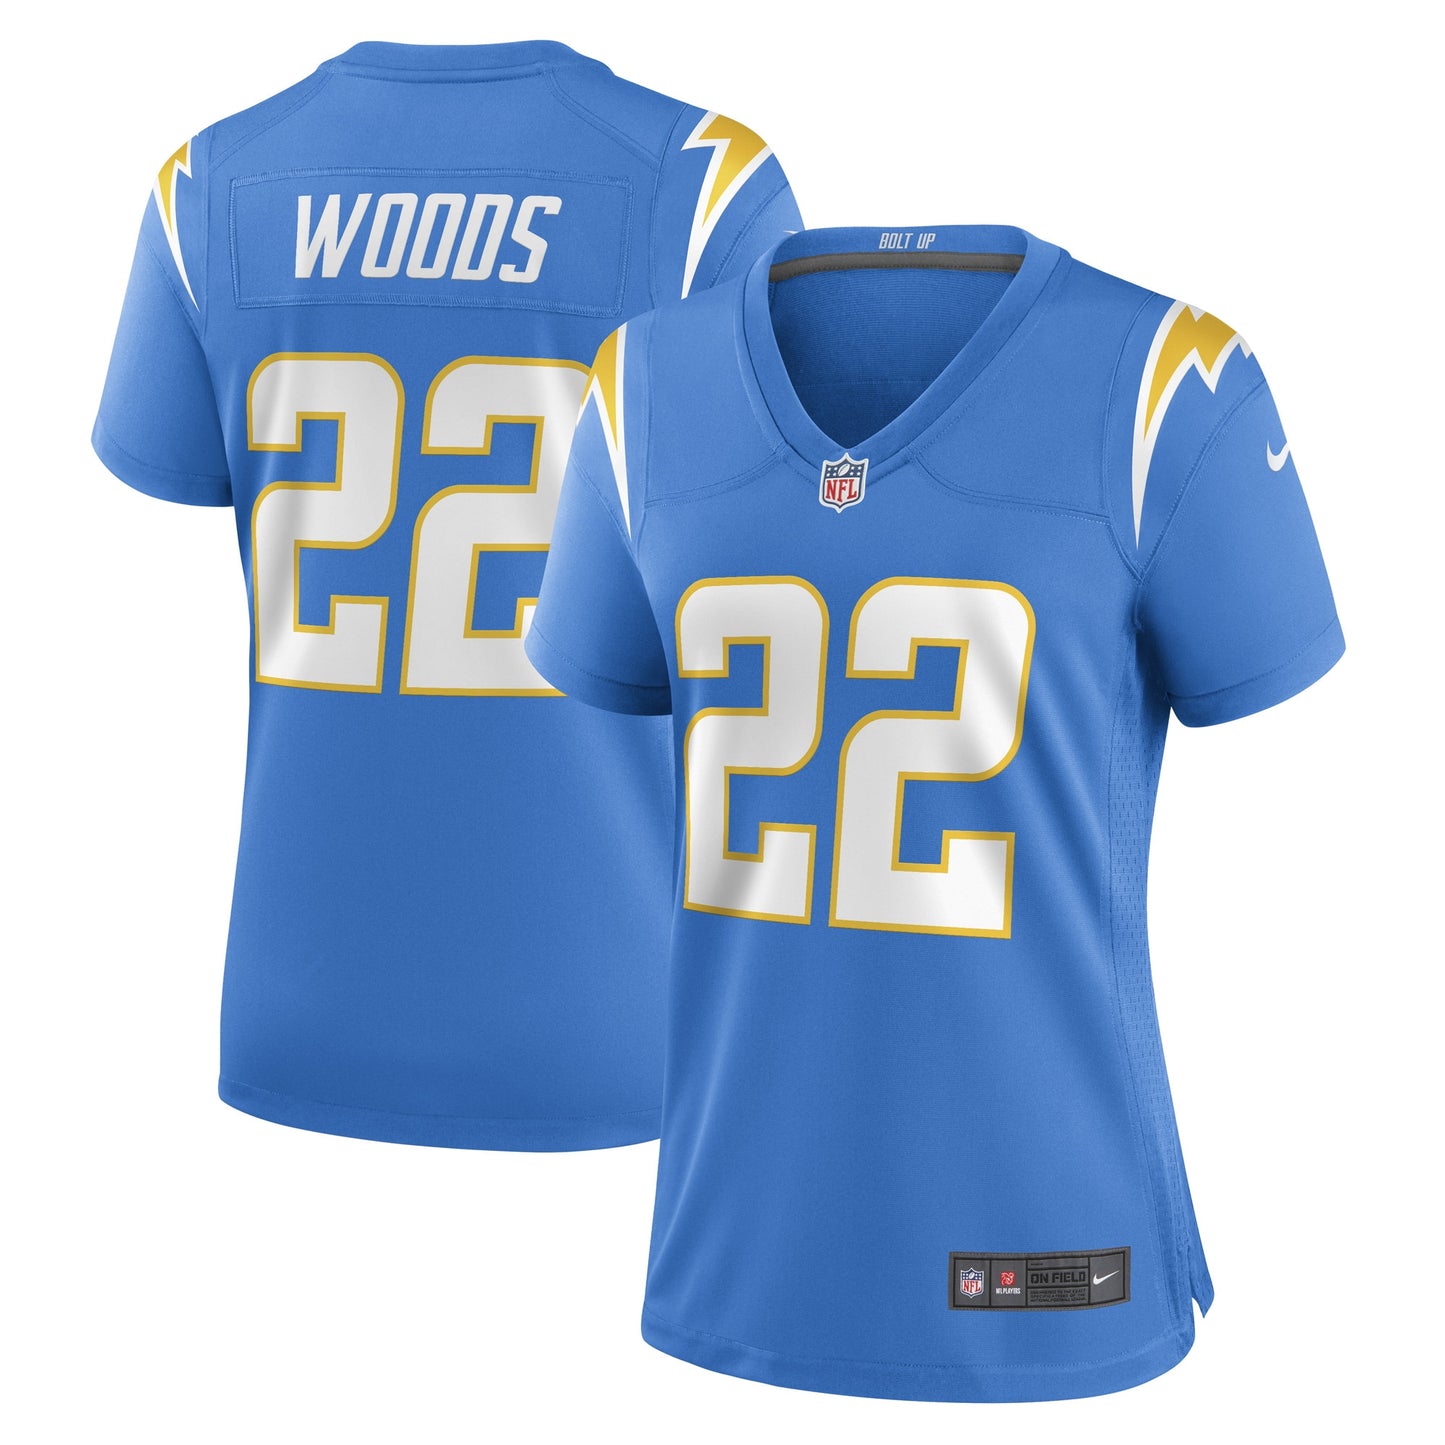 JT Woods Los Angeles Chargers Nike Women's Game Player Jersey - Powder Blue